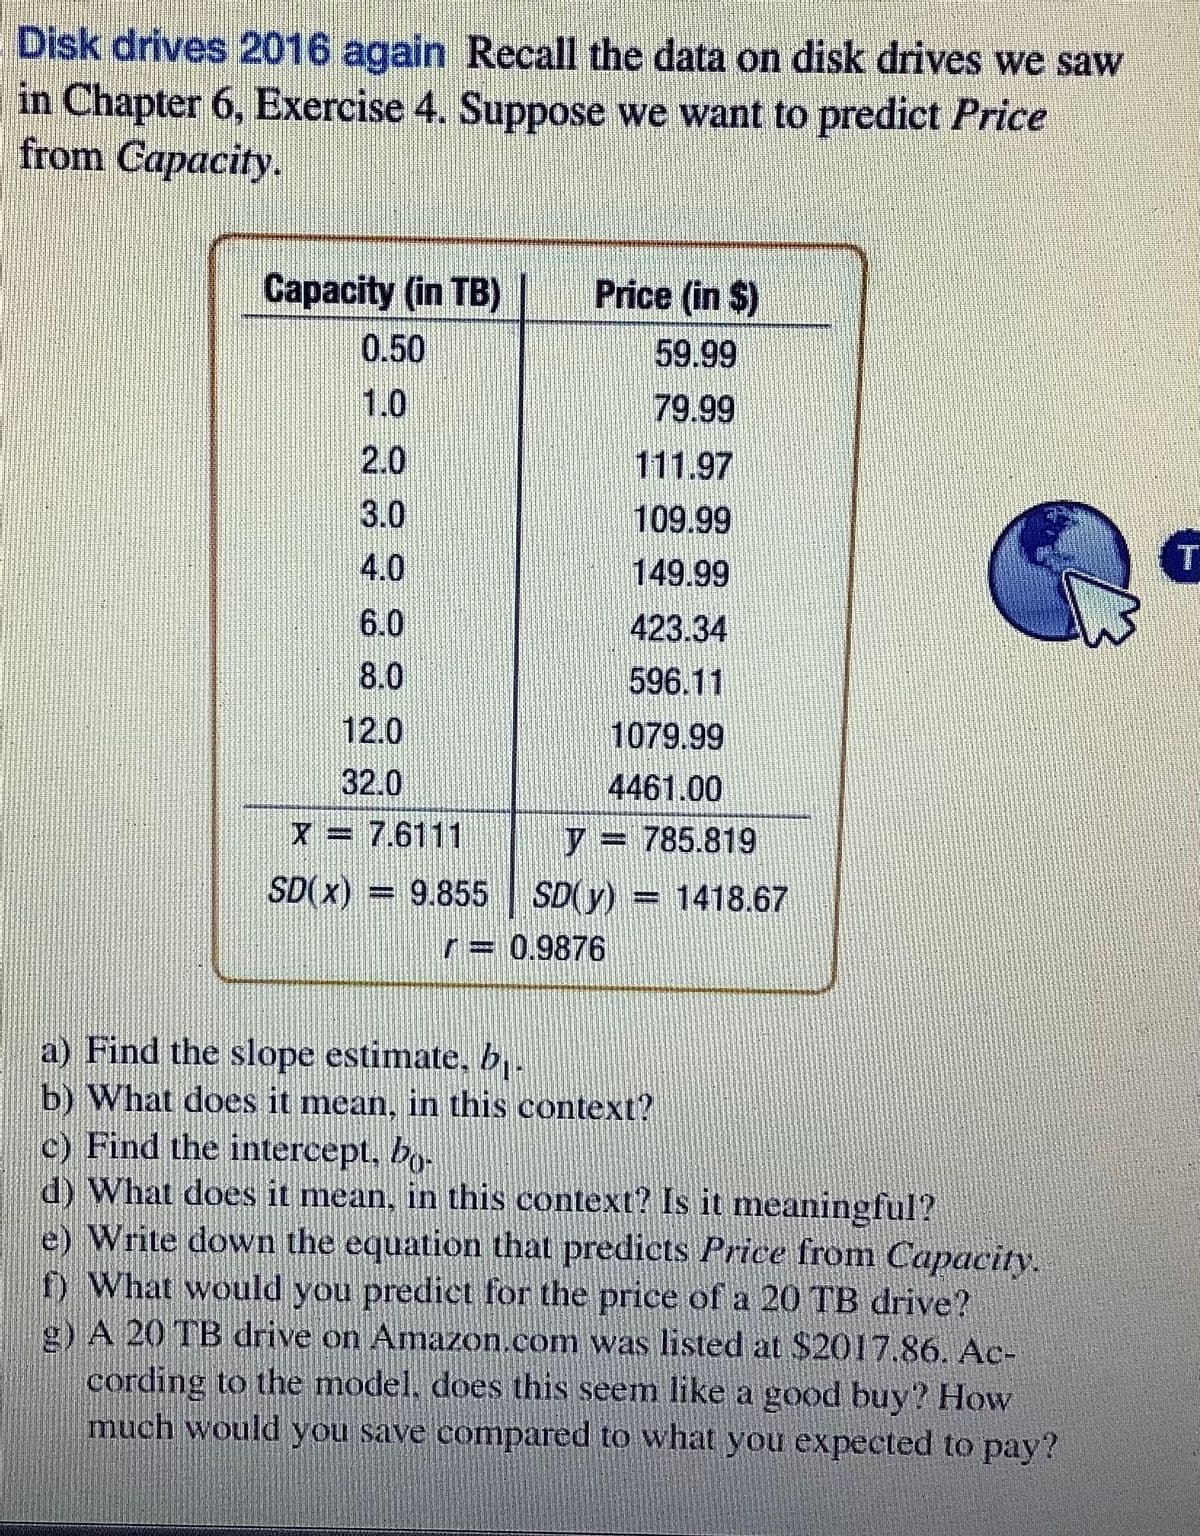 Disk drives 2016 again Recall the data on disk drives we saw
in Chapter 6, Exercise 4. Suppose we want to predict Price
from Capacity.
Capacity (in TB)
Price (in $)
0.50
1.0
59.99
79.99
2.0
111.97
3.0
109.99
4.0
149.99
T
6.0
423.34
596.11
8.0
12.0
1079.99
4461.00
32.0
X = 7.6111
)= 785.819
%3D
SD( x) =
= 9.855 SD(y)
=1418.67
r= 0.9876
a) Find the slope estimate, b..
b) What does it mean, in this context?
c) Find the intercept, bo-
d) What does it mean, in this context? Is it meaningful?
e) Write down the equation that predicts Price from Capacity.
f) What would you predict for the price of a 20 TB drive?
g) A 20 TB drive on Amazon.com was listed at $2017.86. Ac-
cording to the model, does this seem like a good buy? How
much would you save compared to what you expected to pay?
